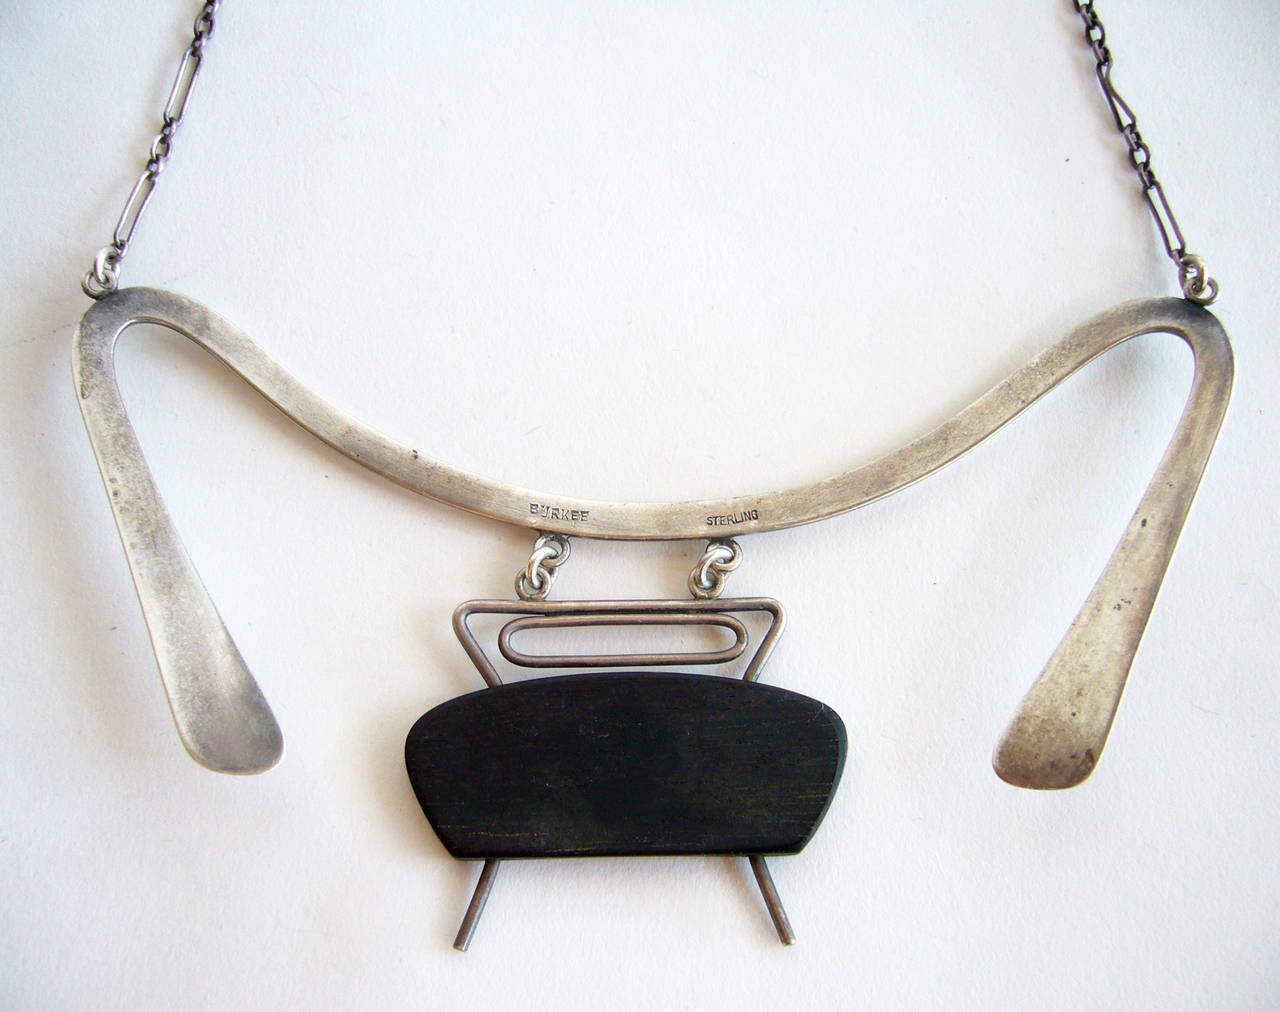 Women's Irvin and Bonnie Burkee Sterling Silver Wood Abstract Modernist Necklace